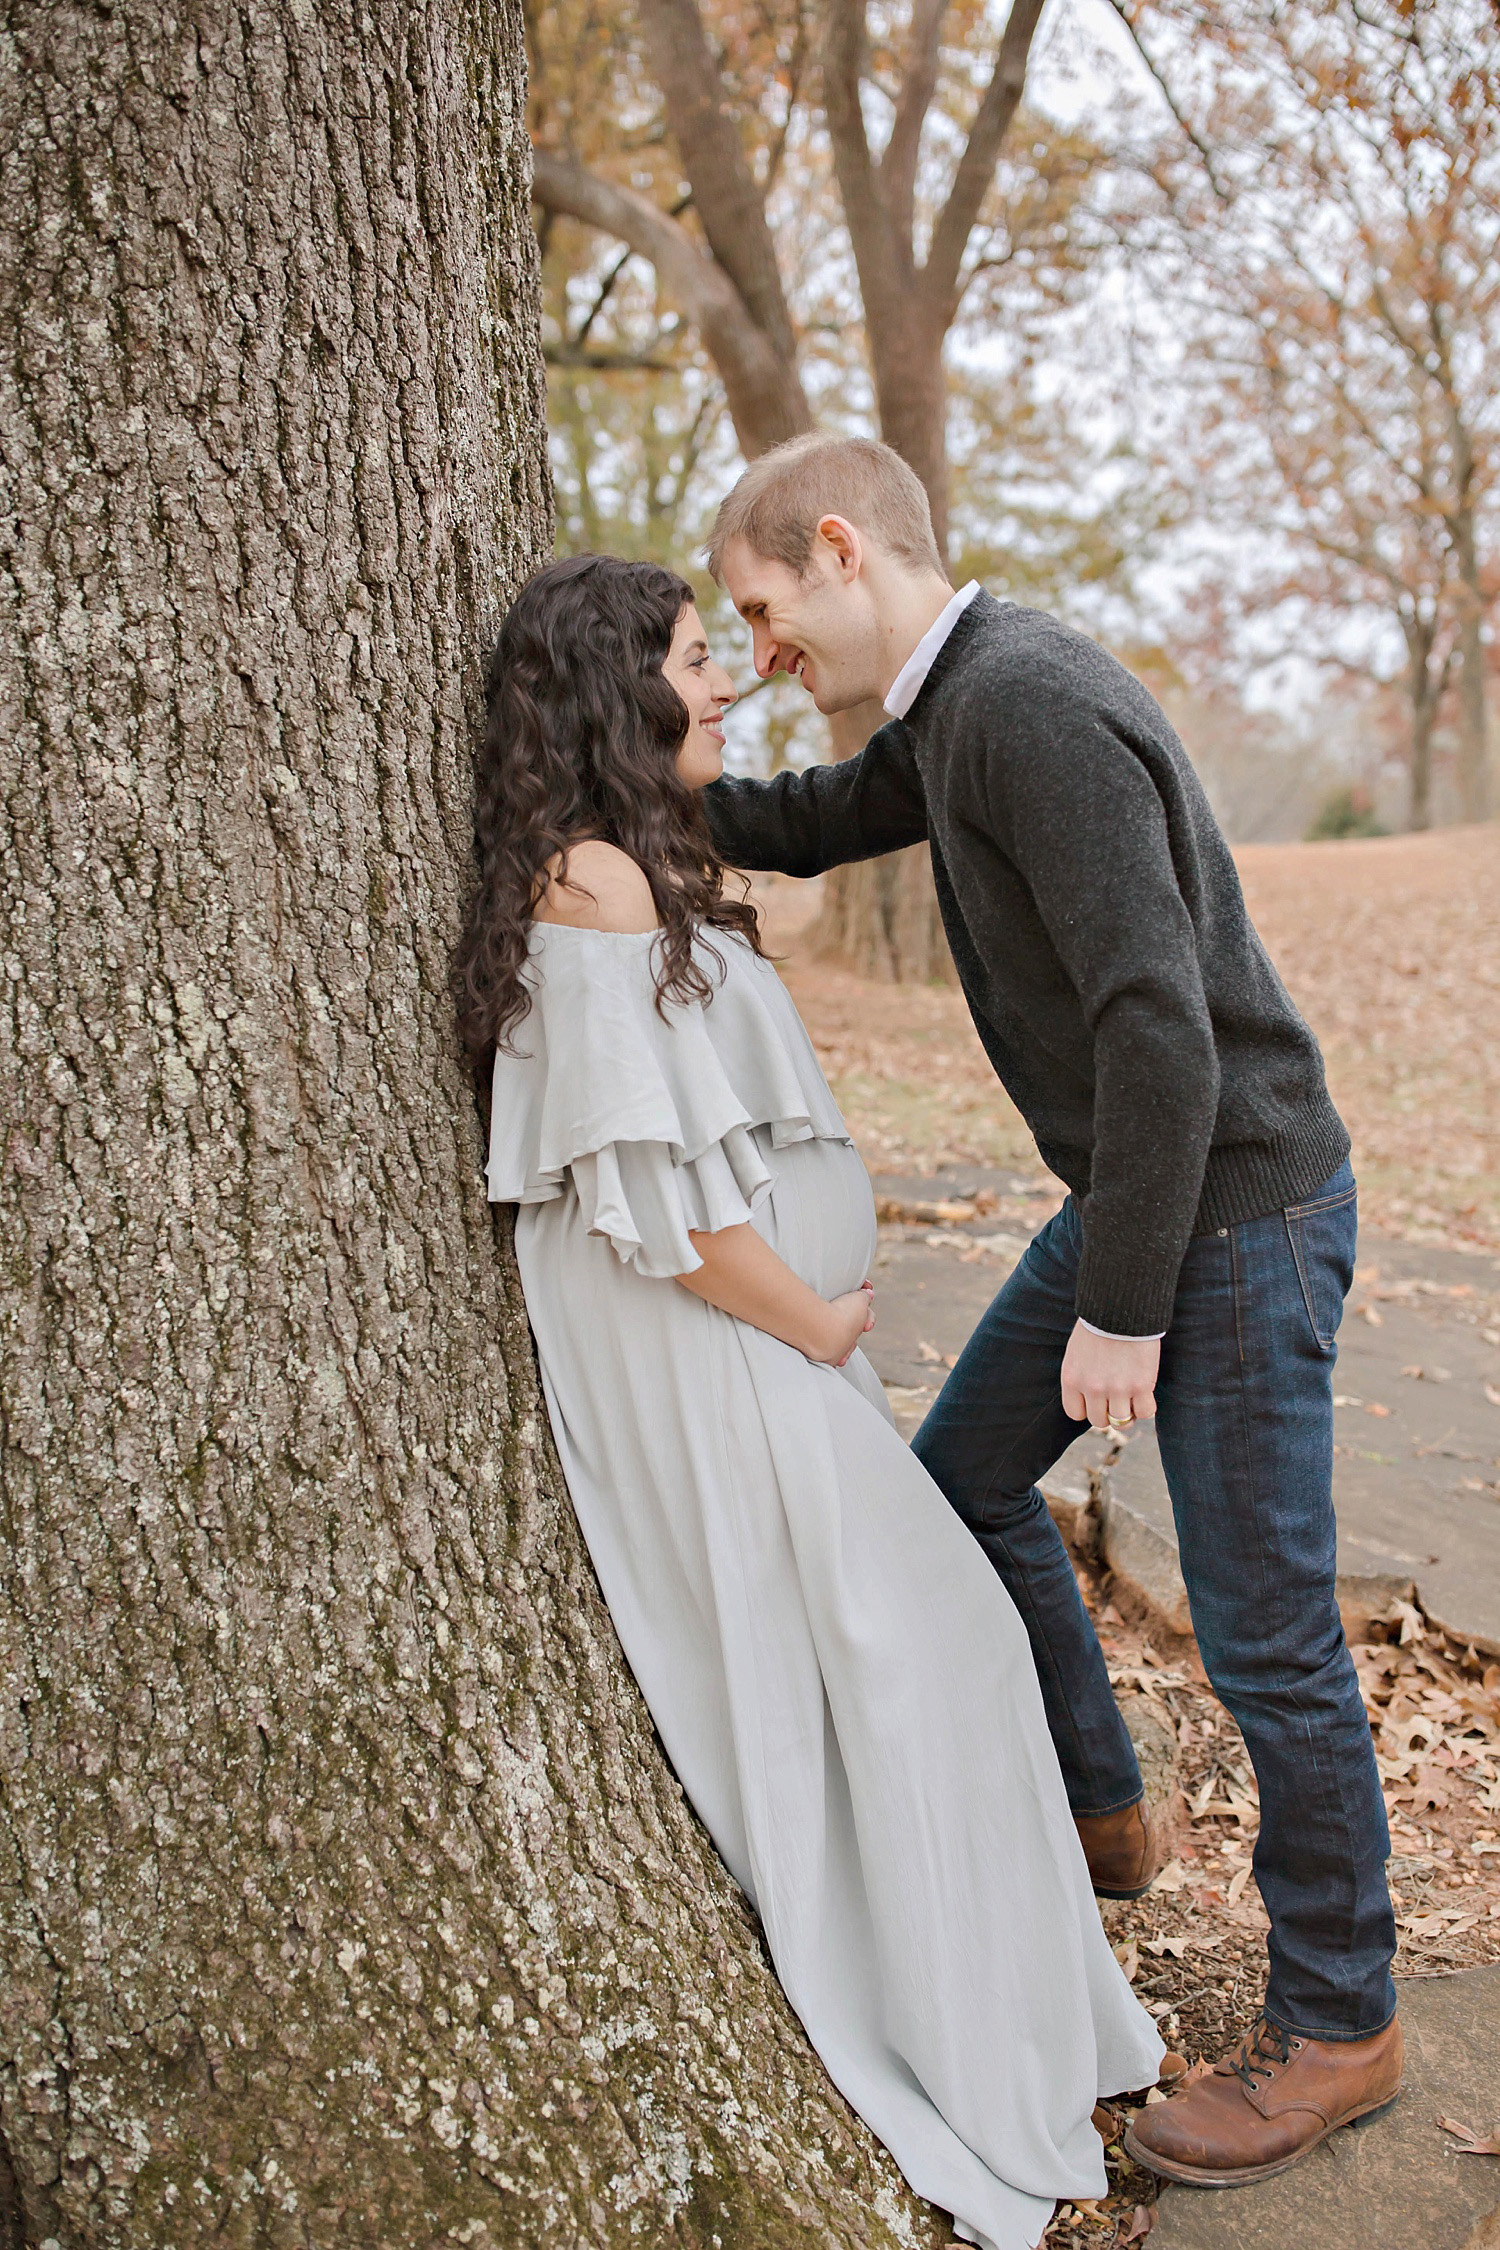 Husband leaning in to kiss pregnant wife against a tree in a park in Atlanta, Georgia